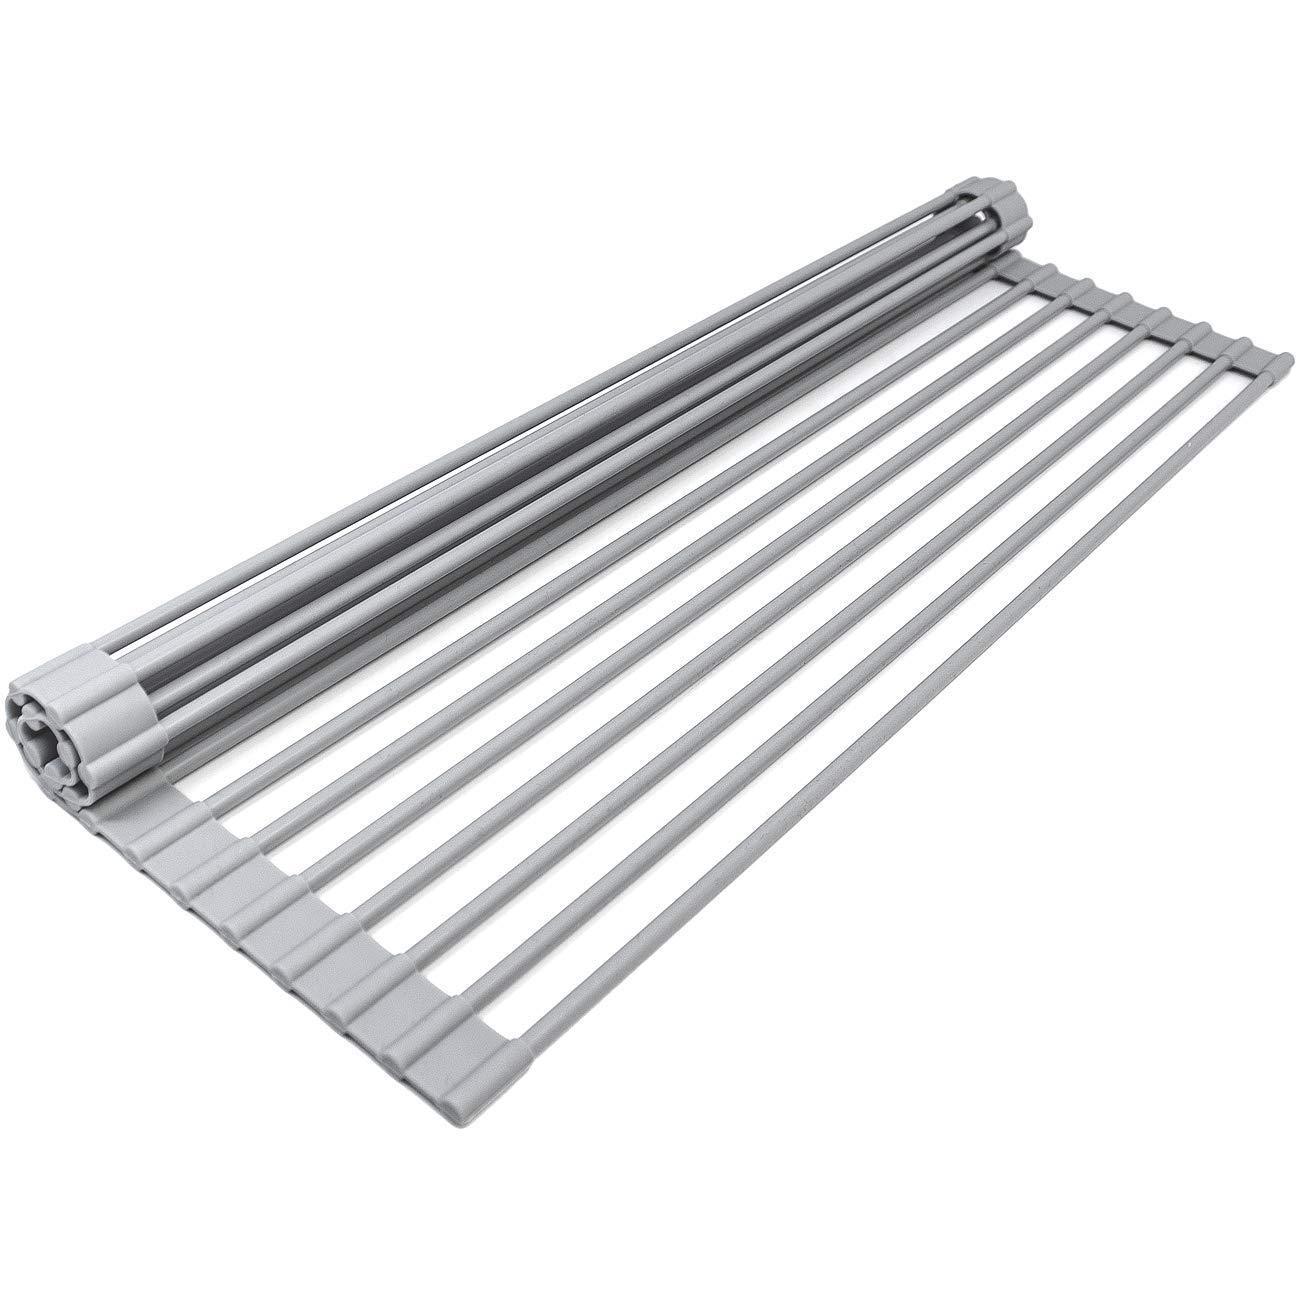 Spot Roller Shutter Folding Drain Rack Can Be Rolled And Foldable Pool Silicone Storage Rack Sink Roller Shutter Drain Basket